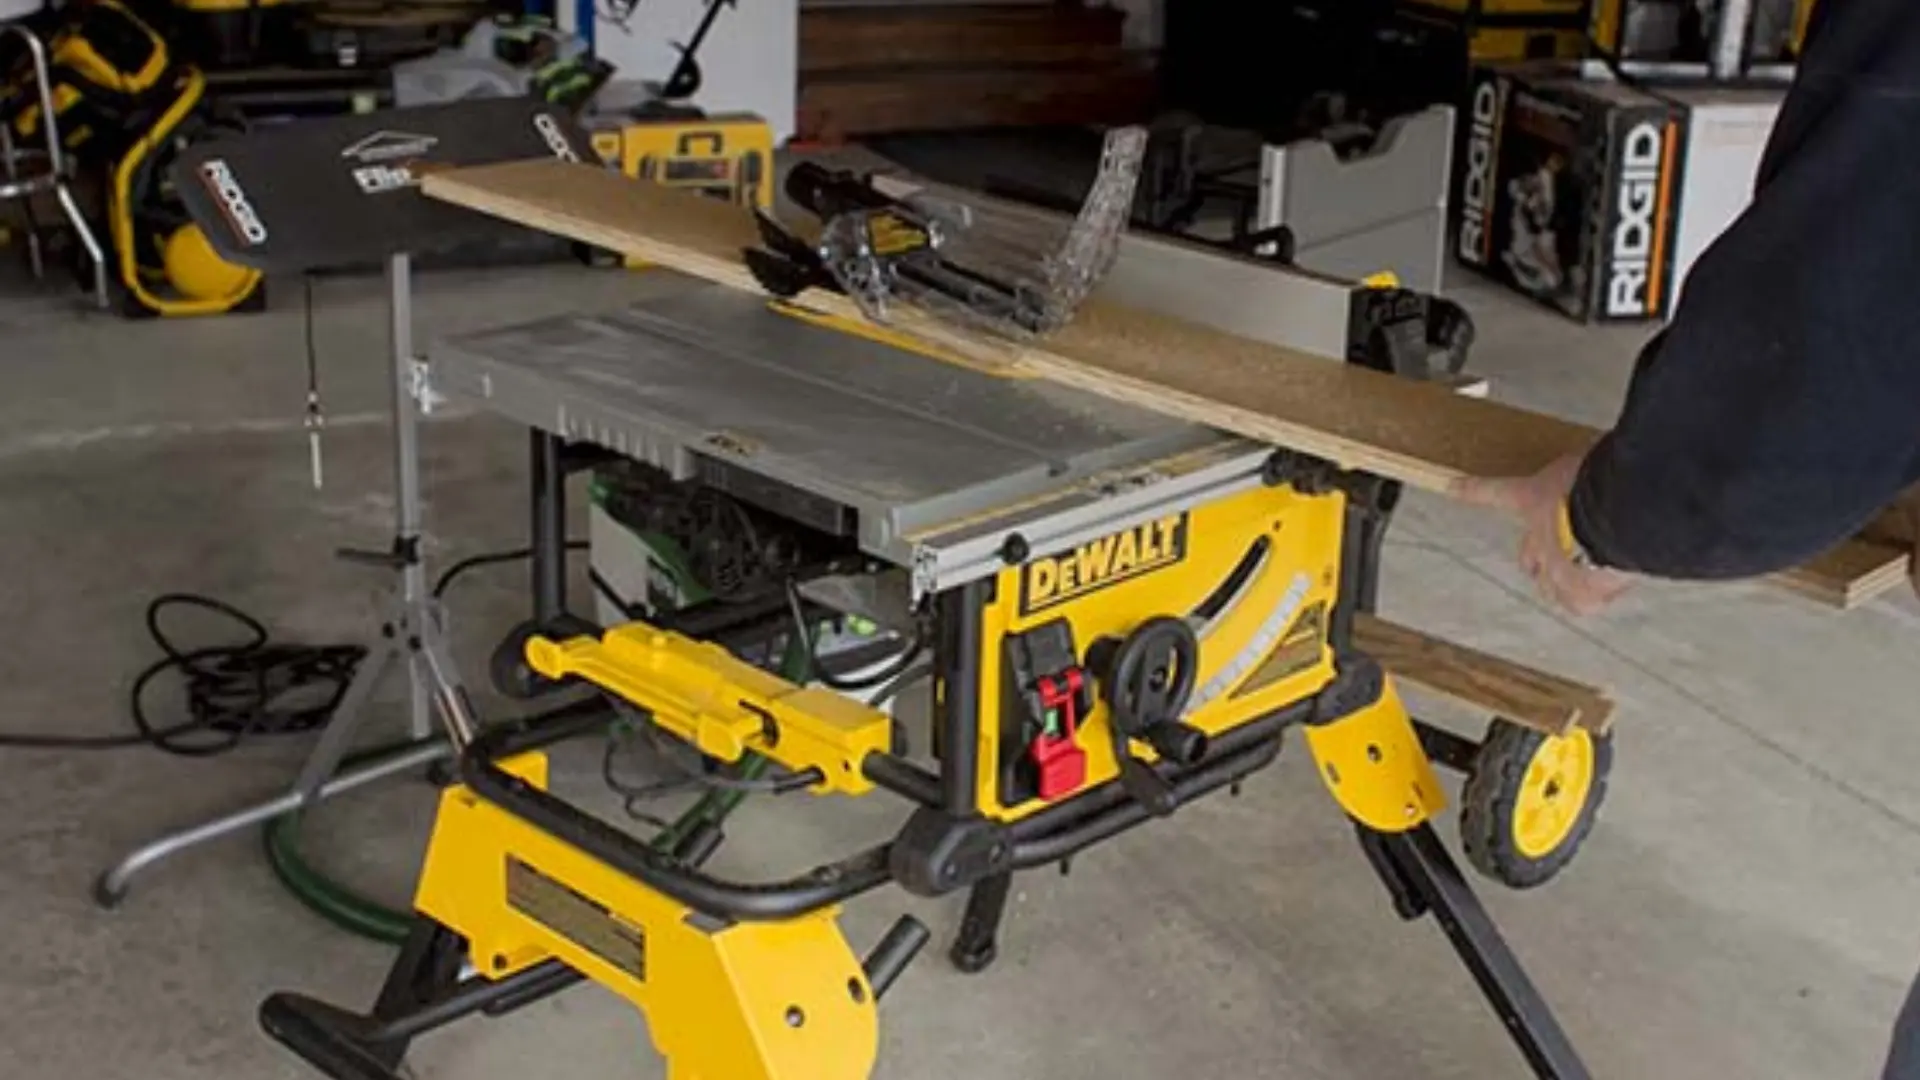 The watts used by a table saw